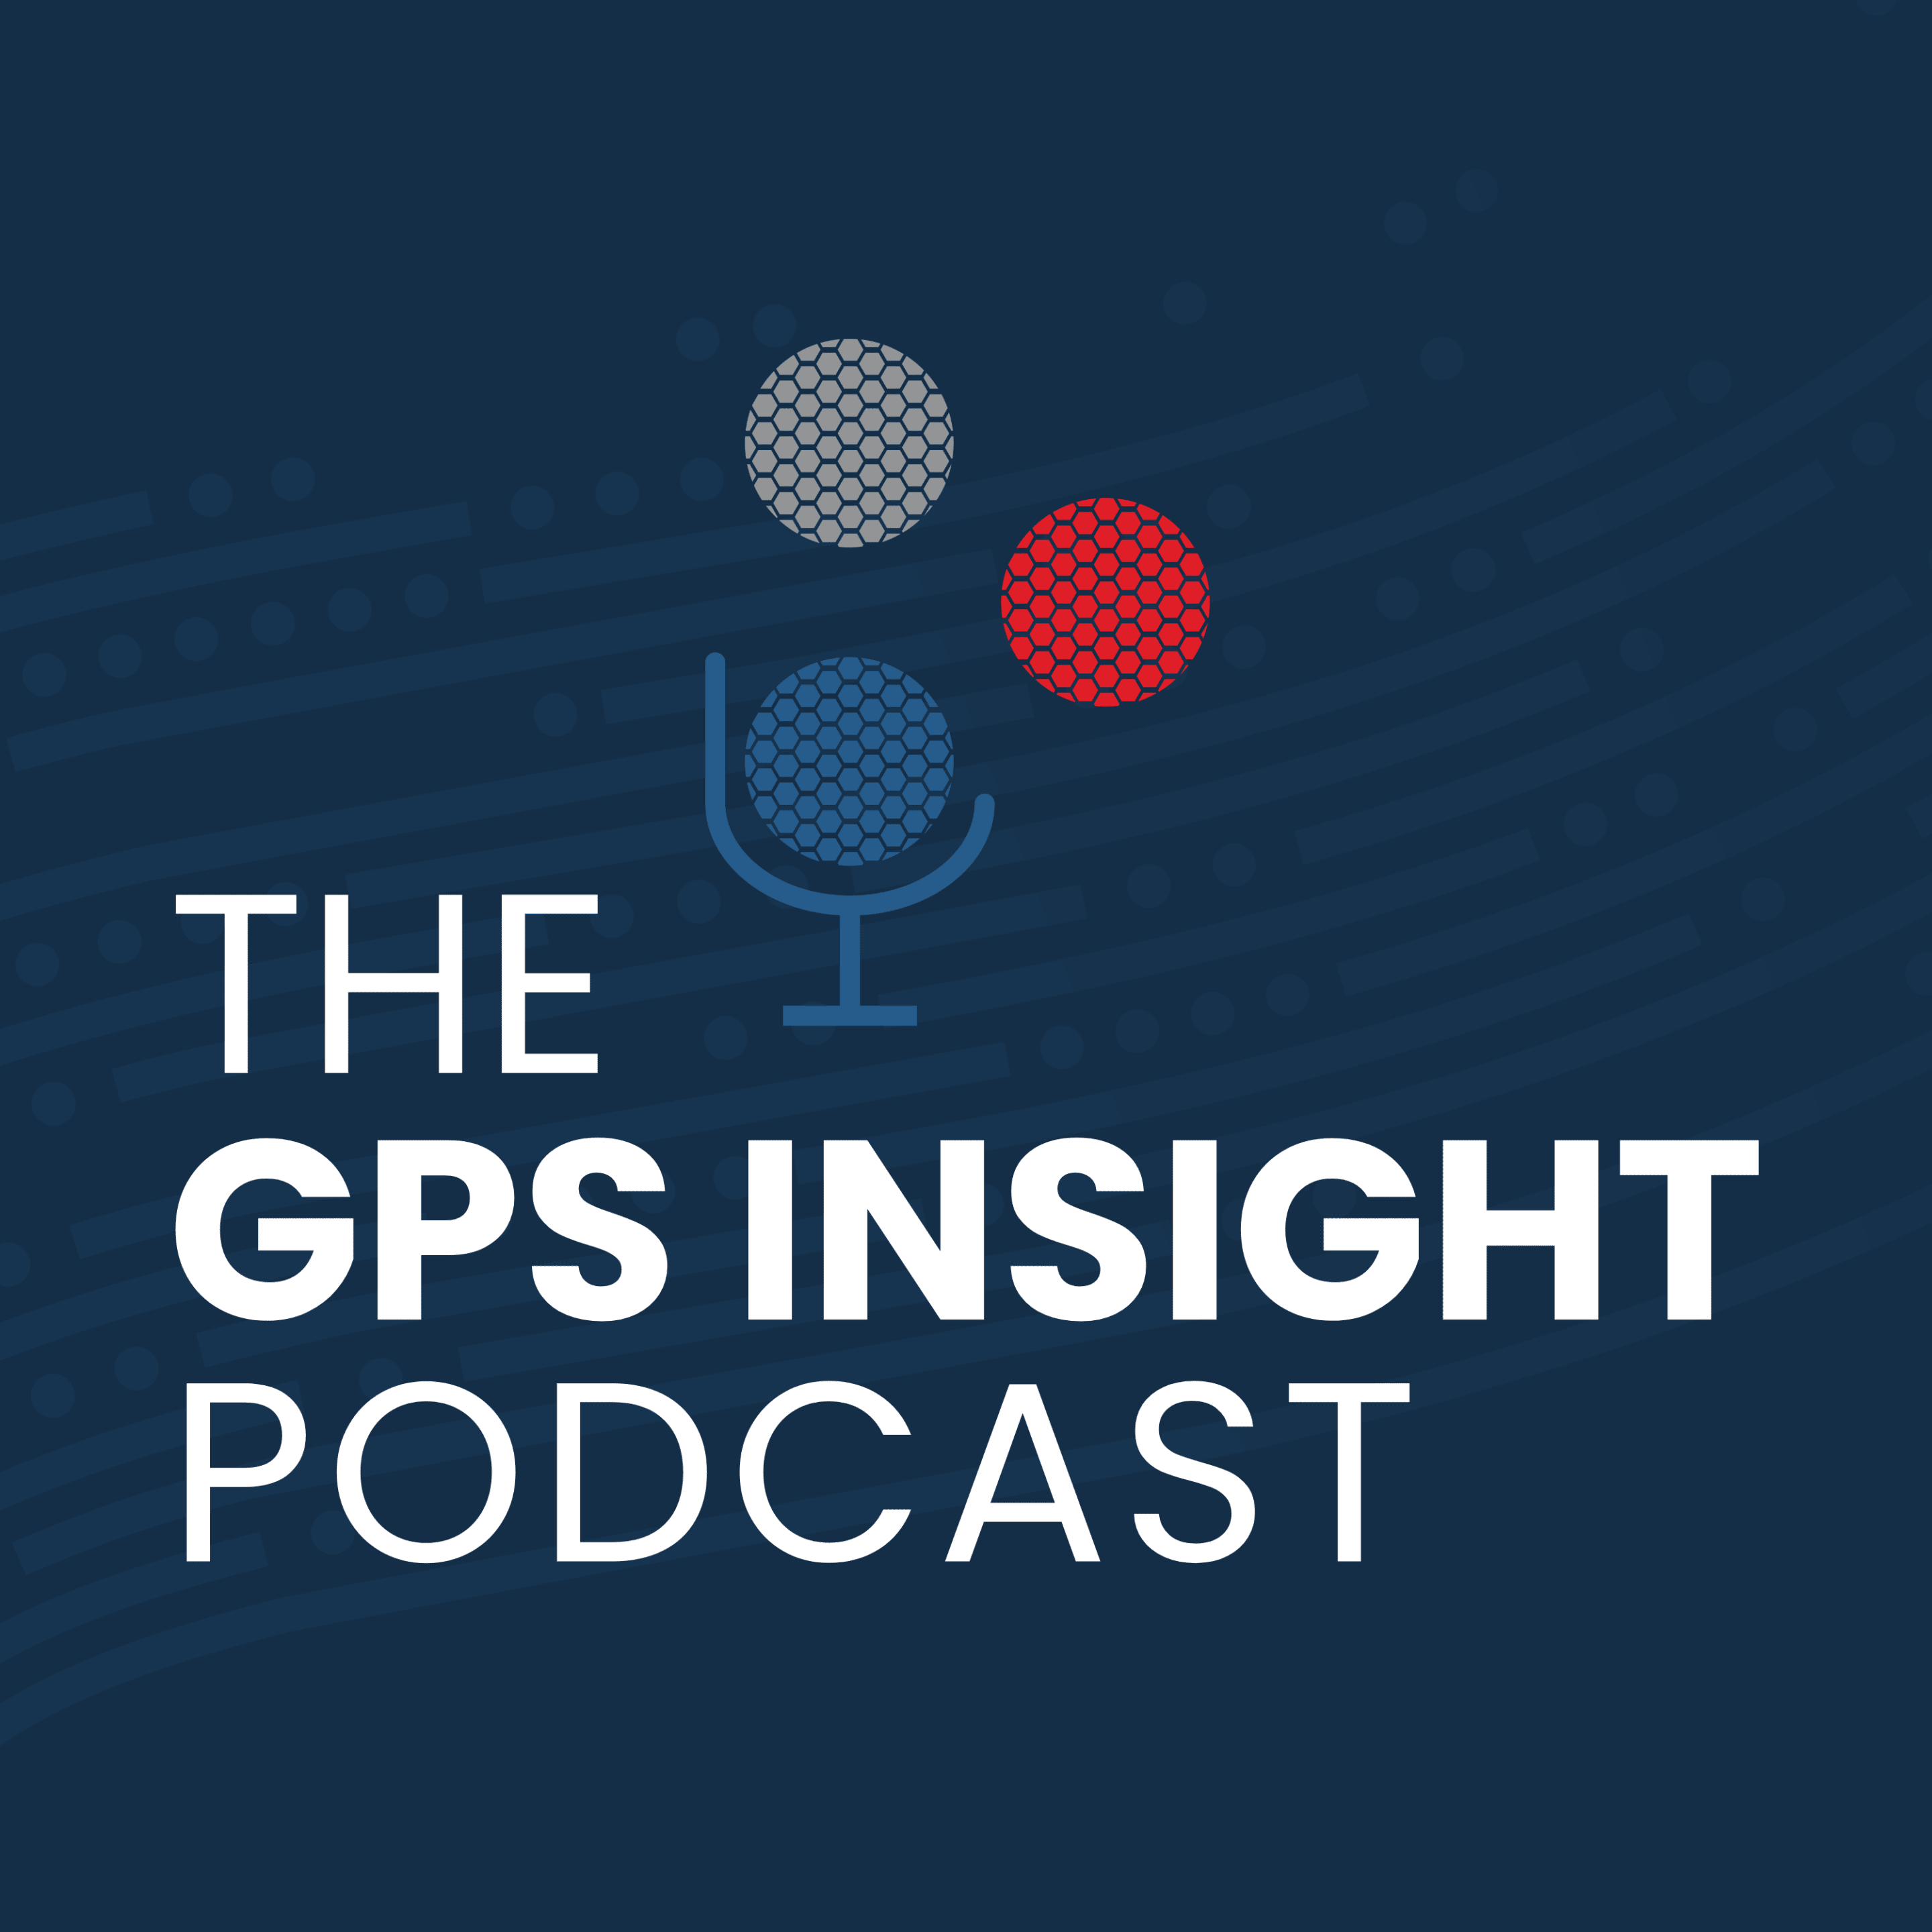 The GPS Insight Podcast